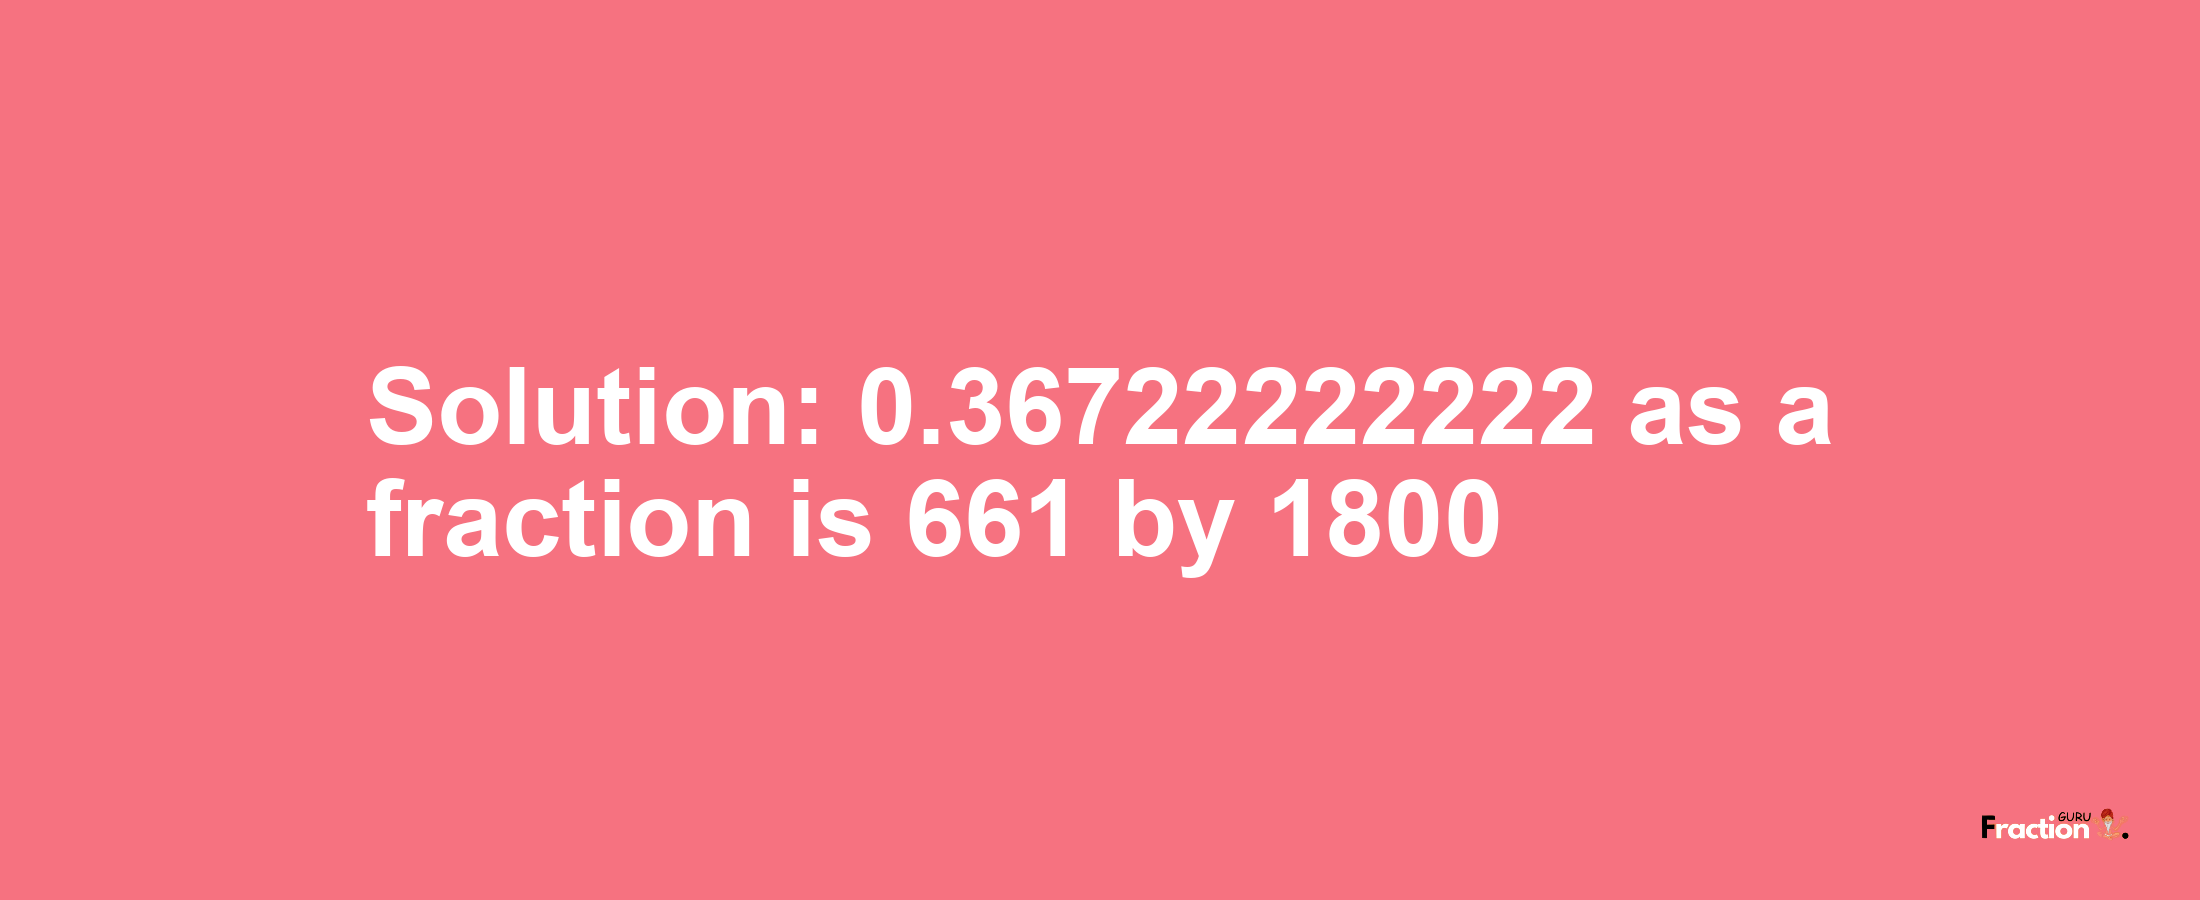 Solution:0.36722222222 as a fraction is 661/1800